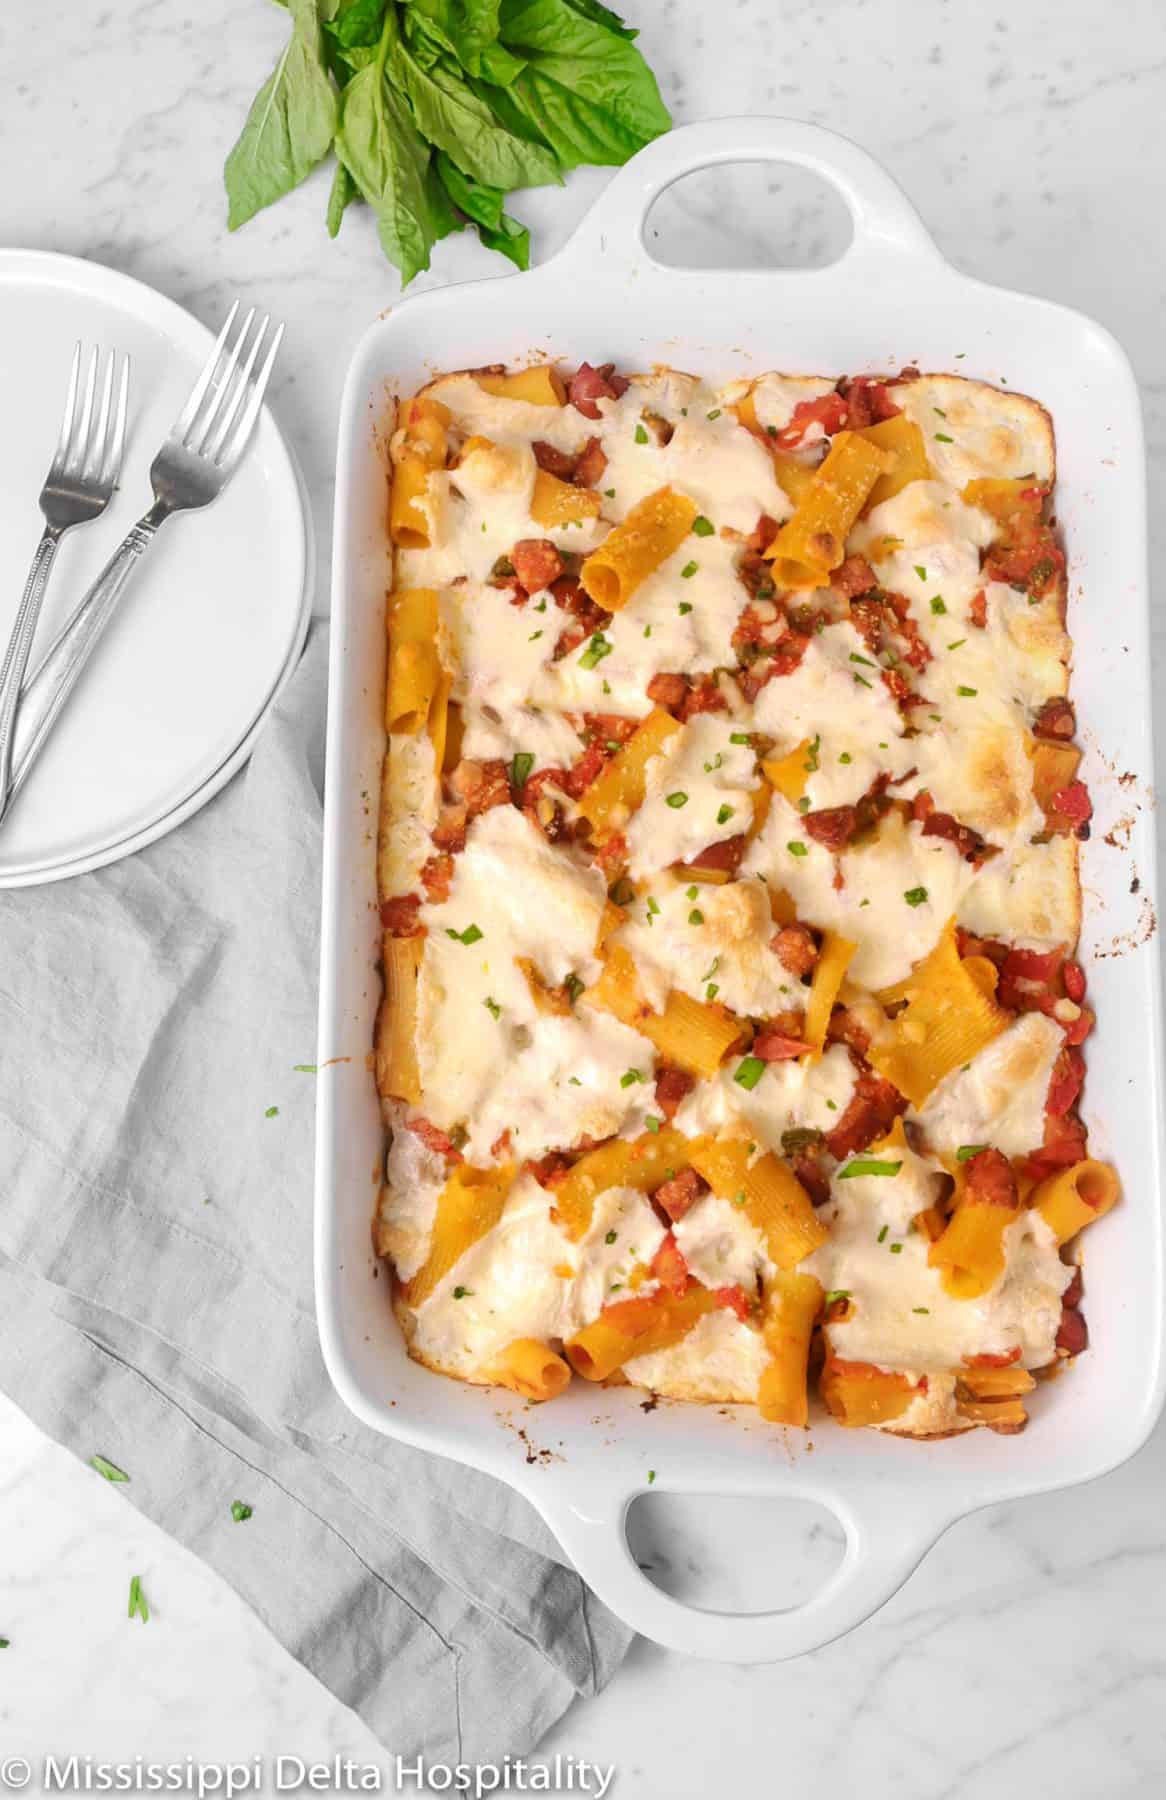 baked rigatoni on a marble board with two plates, two forks, a grey napkin, and basil leaves